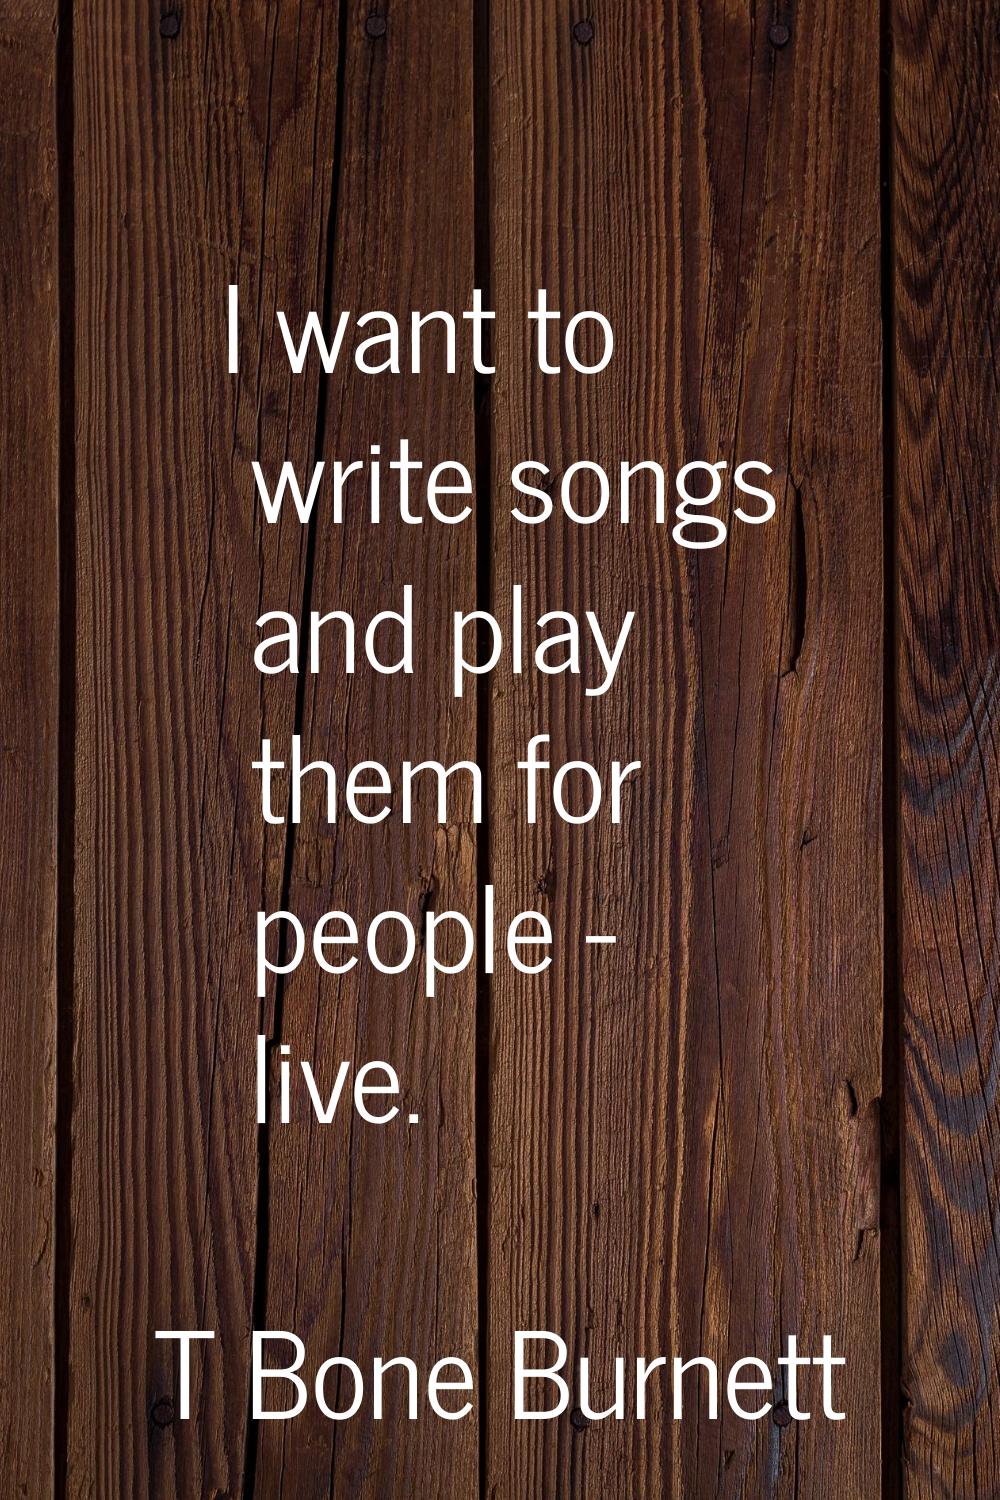 I want to write songs and play them for people - live.